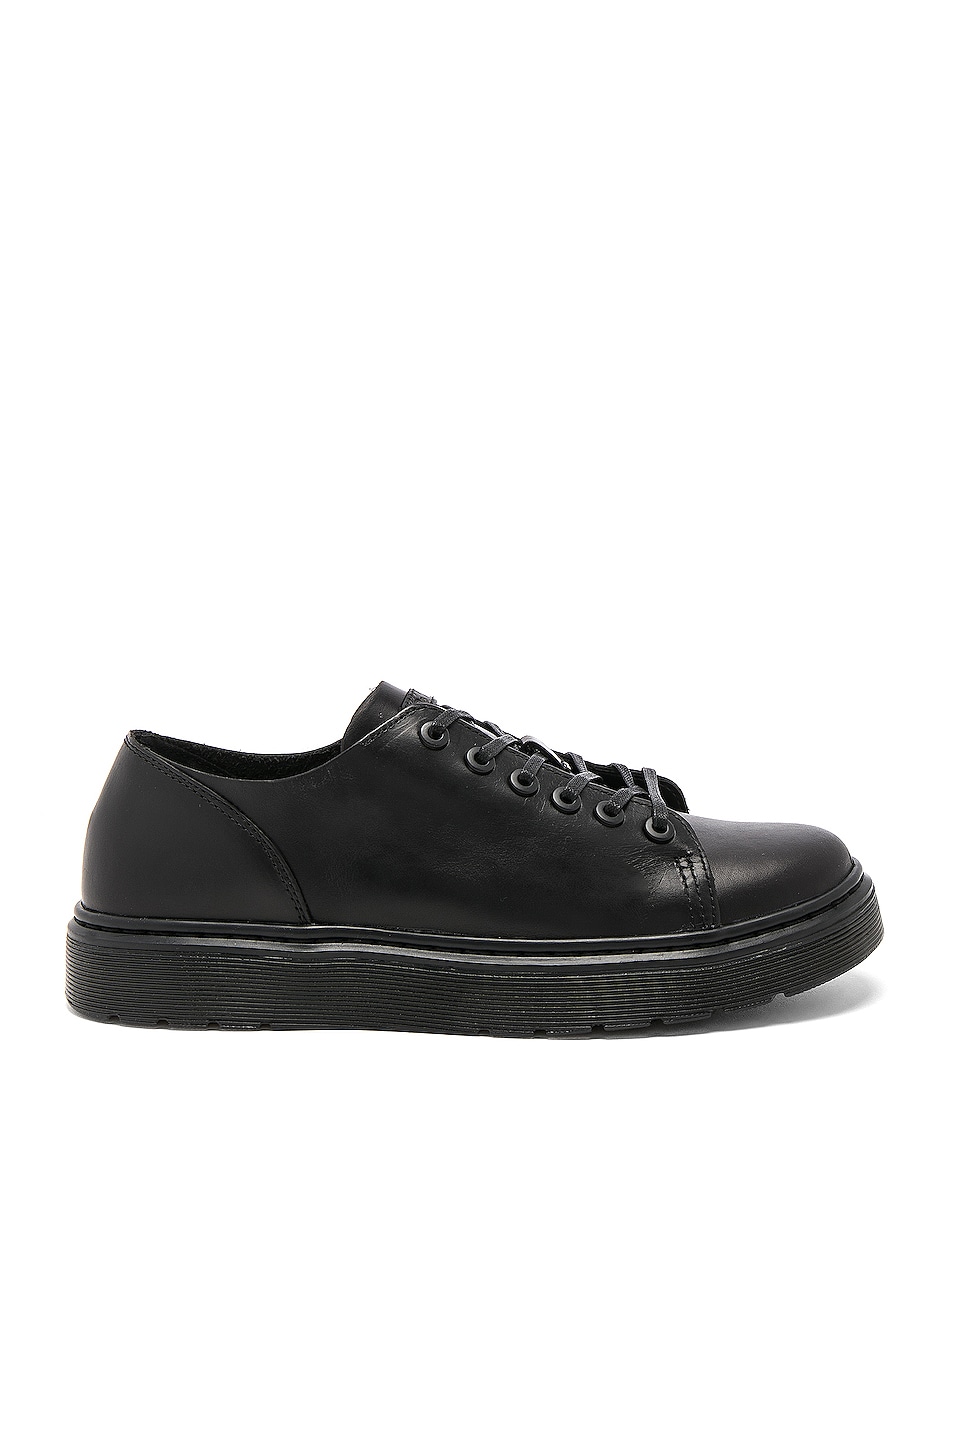 Image 1 of Dr. Martens Dante 6 Eye Leather Shoes in Black